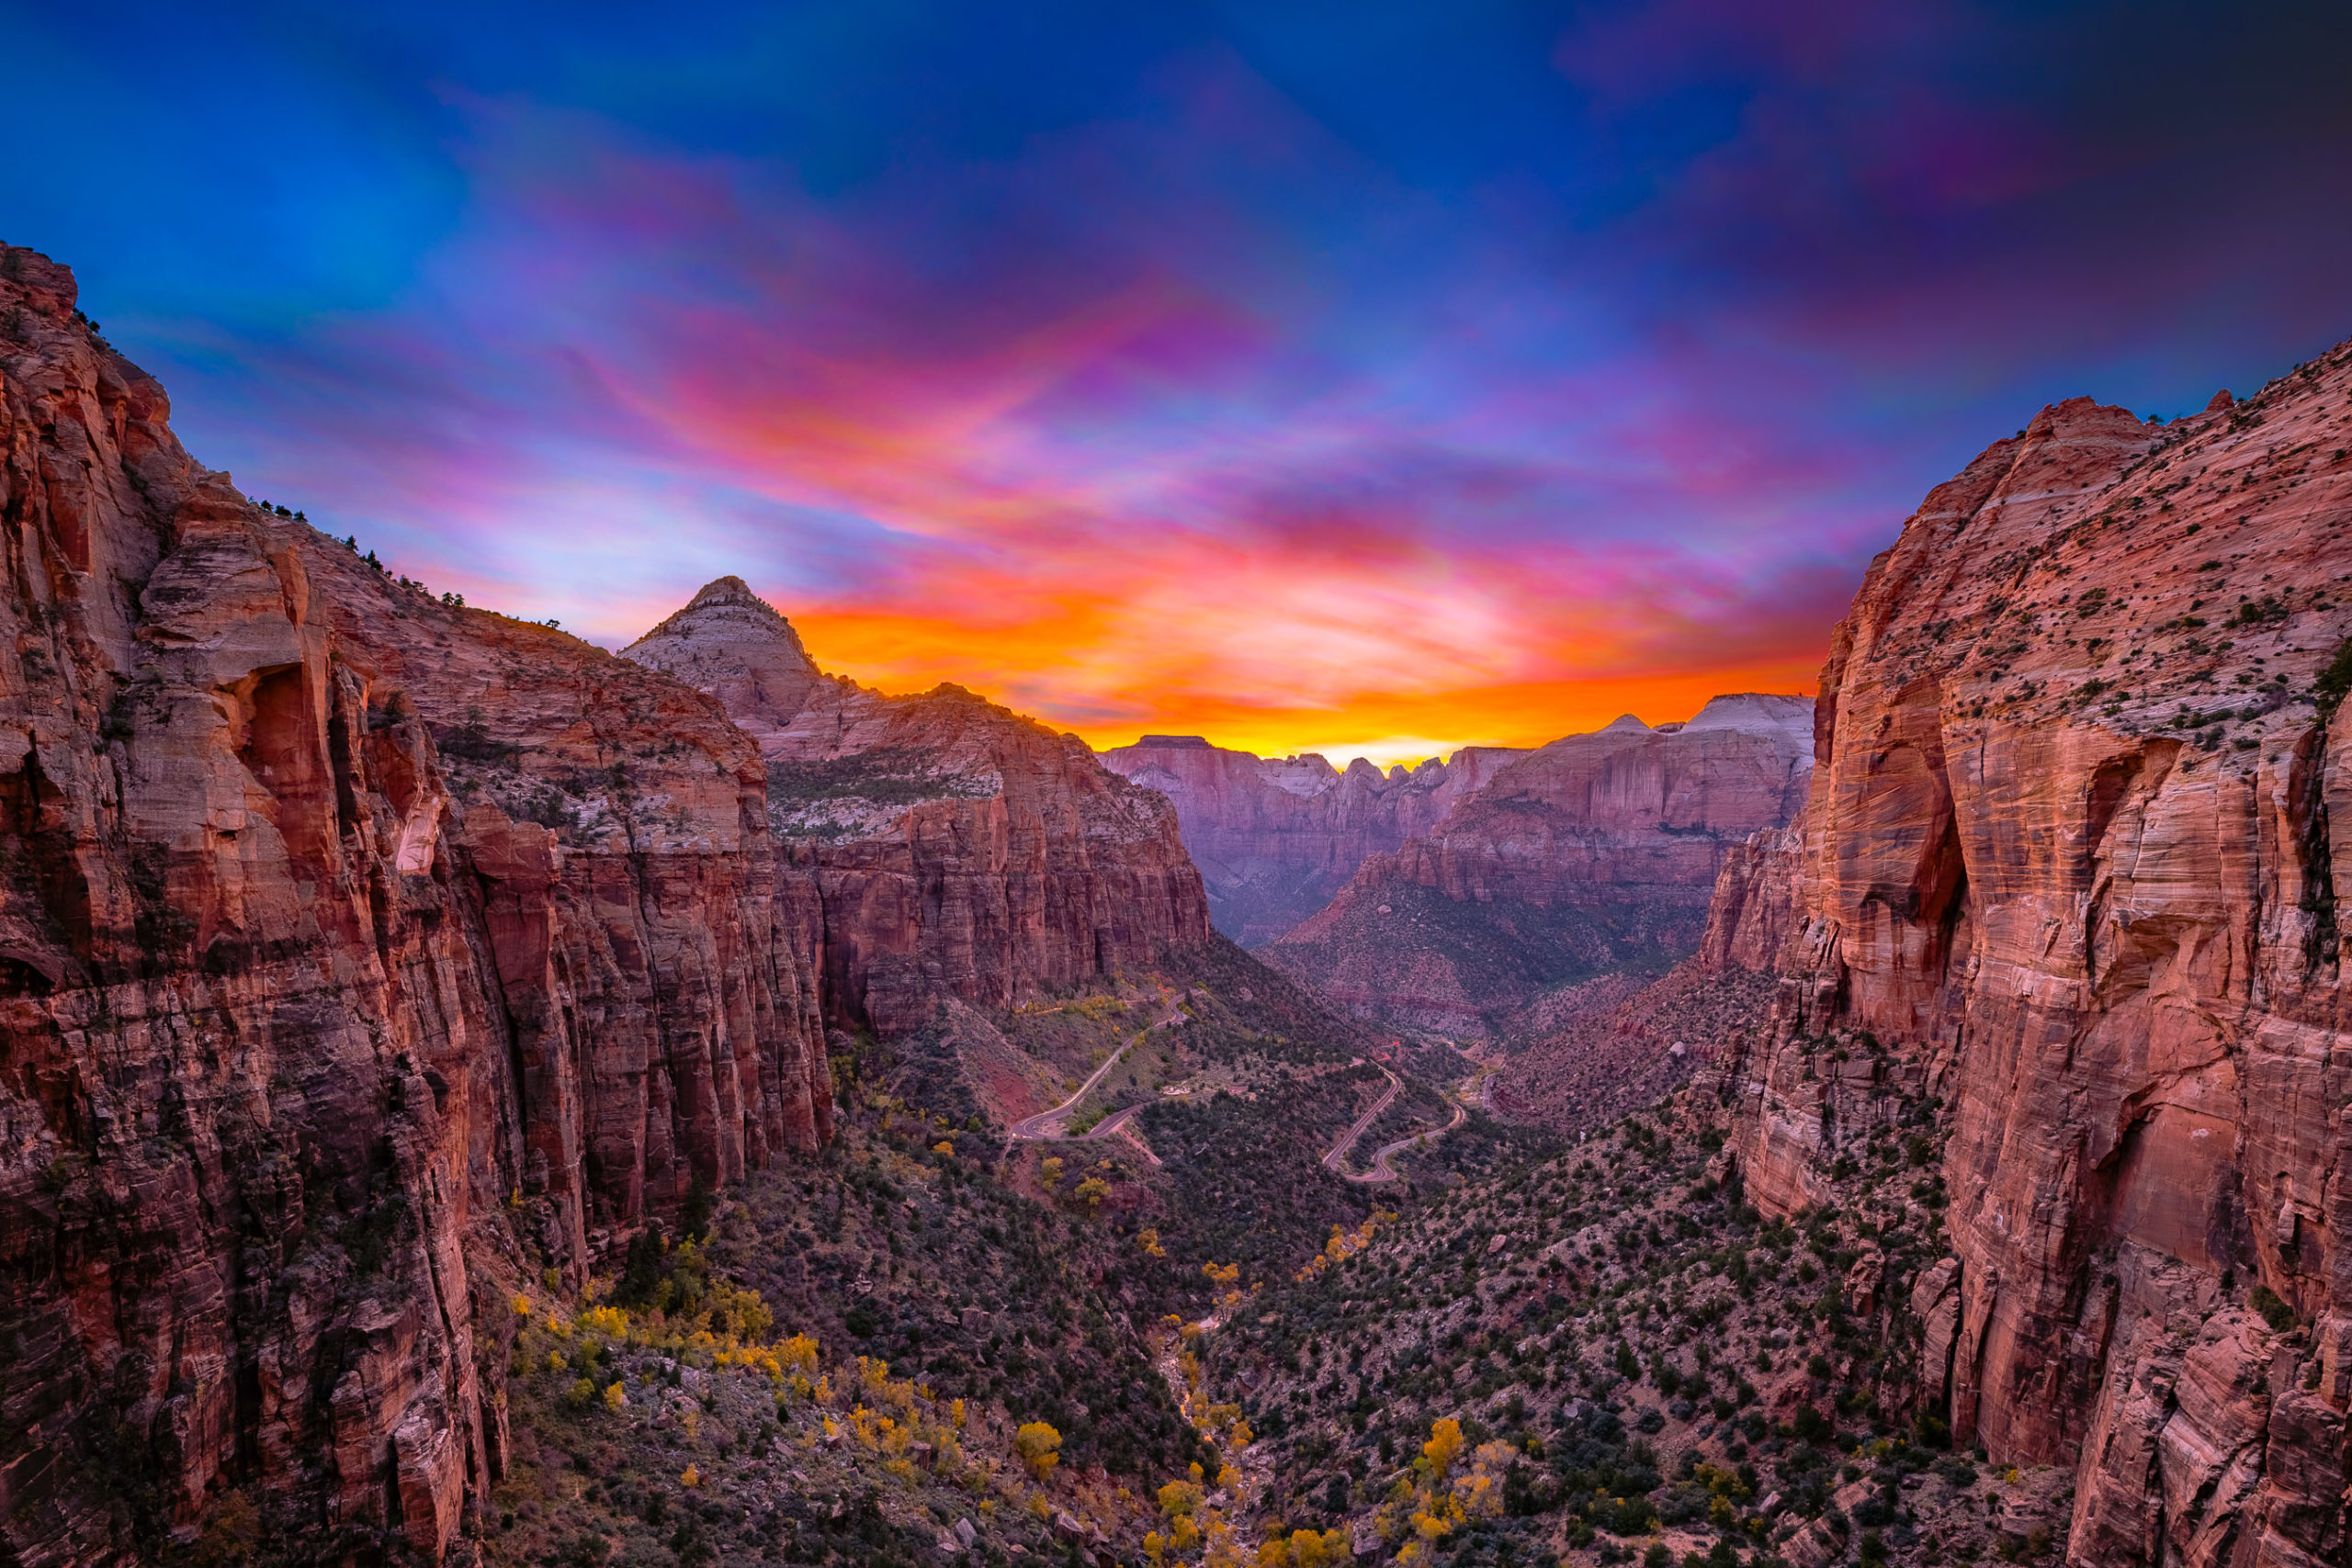 Sunset at Canyon Overlook Trail in Zion National Park